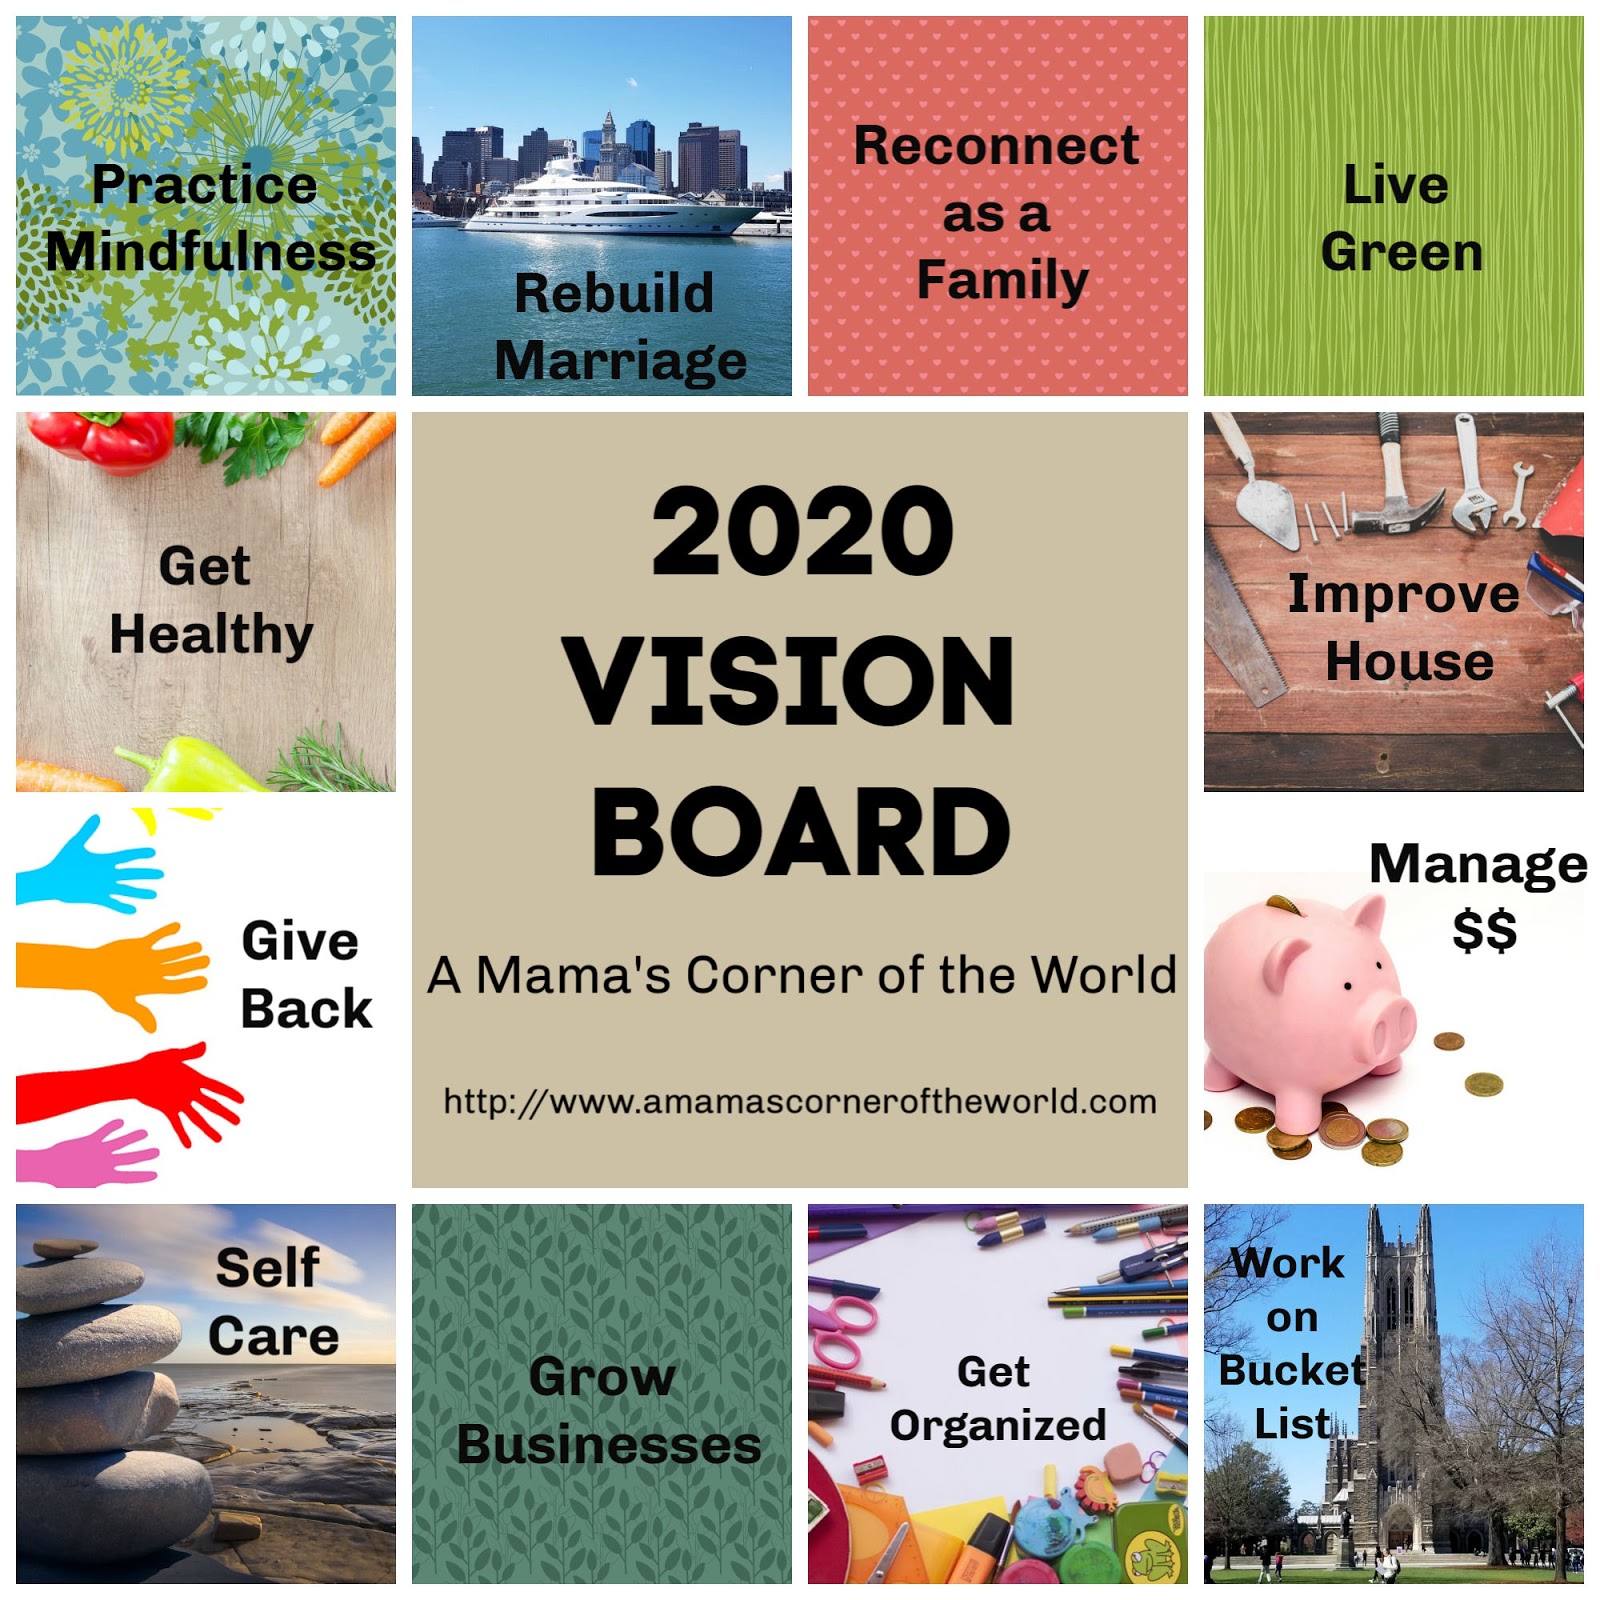 Achieving Your Goals How I Create A Weekly Action Board From My Vision Board Goals A Mama S Corner Of The World